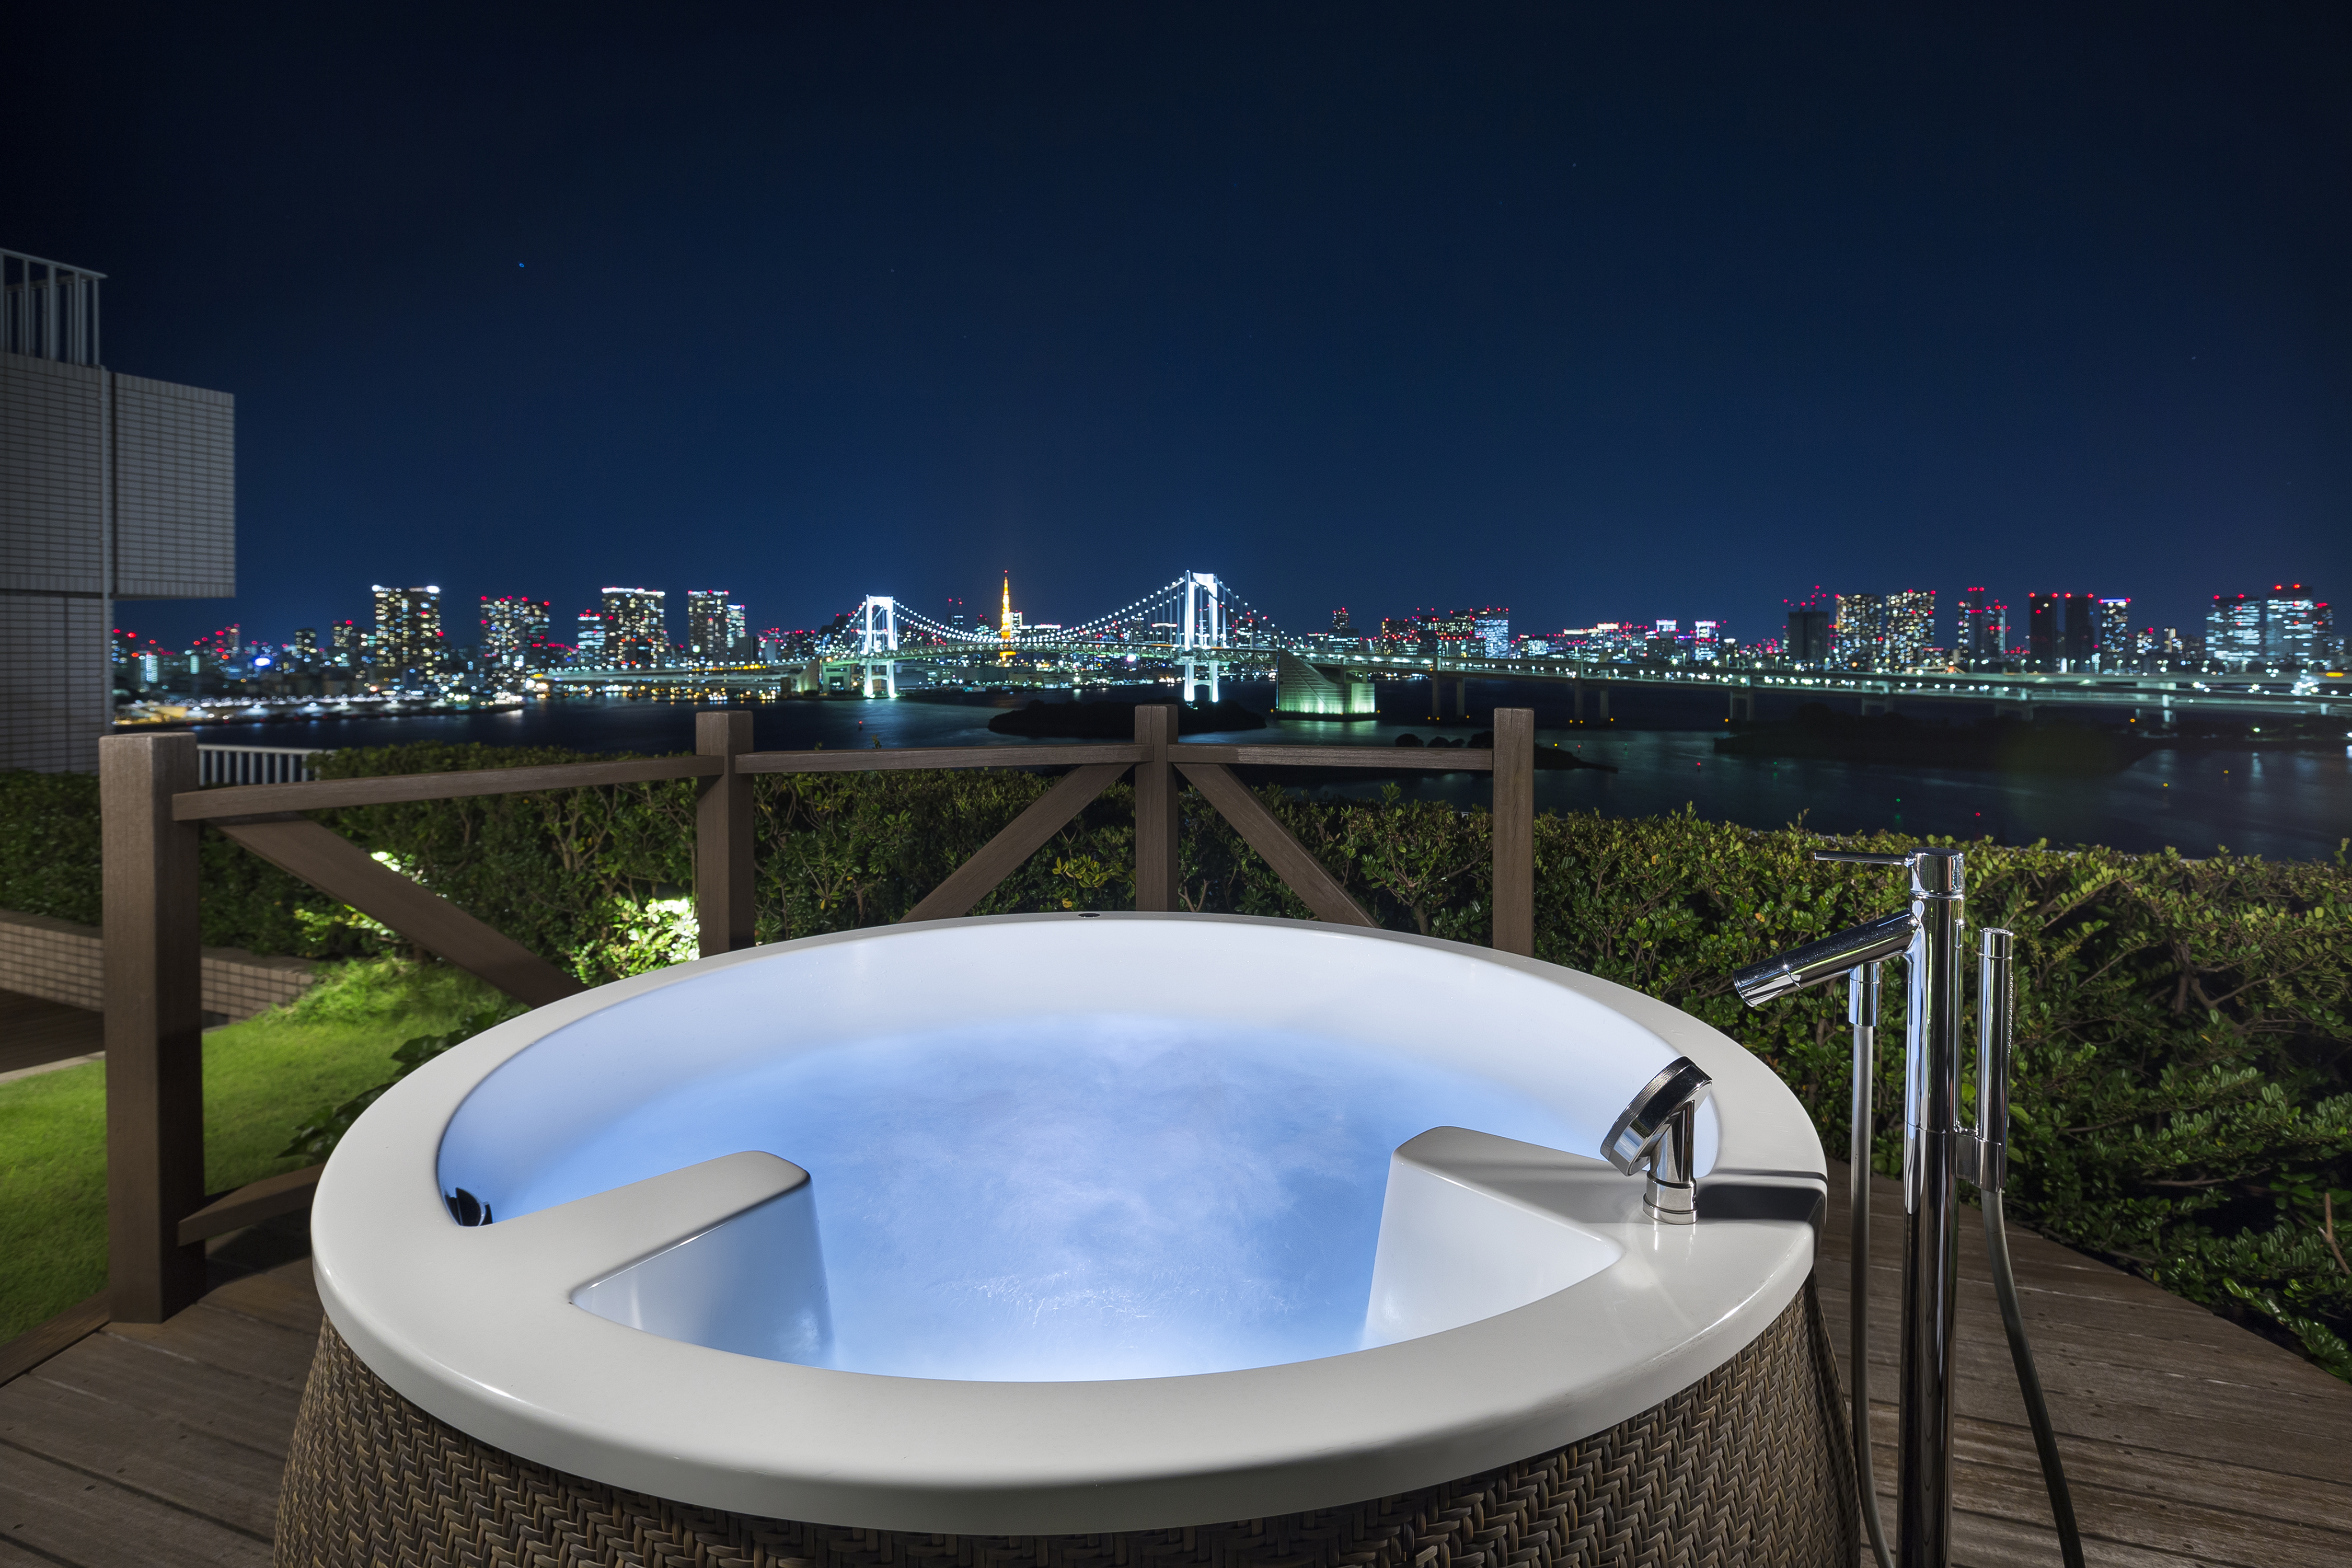 Guest Suite Outdoor Hut Tub Terrace Suite at Night with City Skyline View